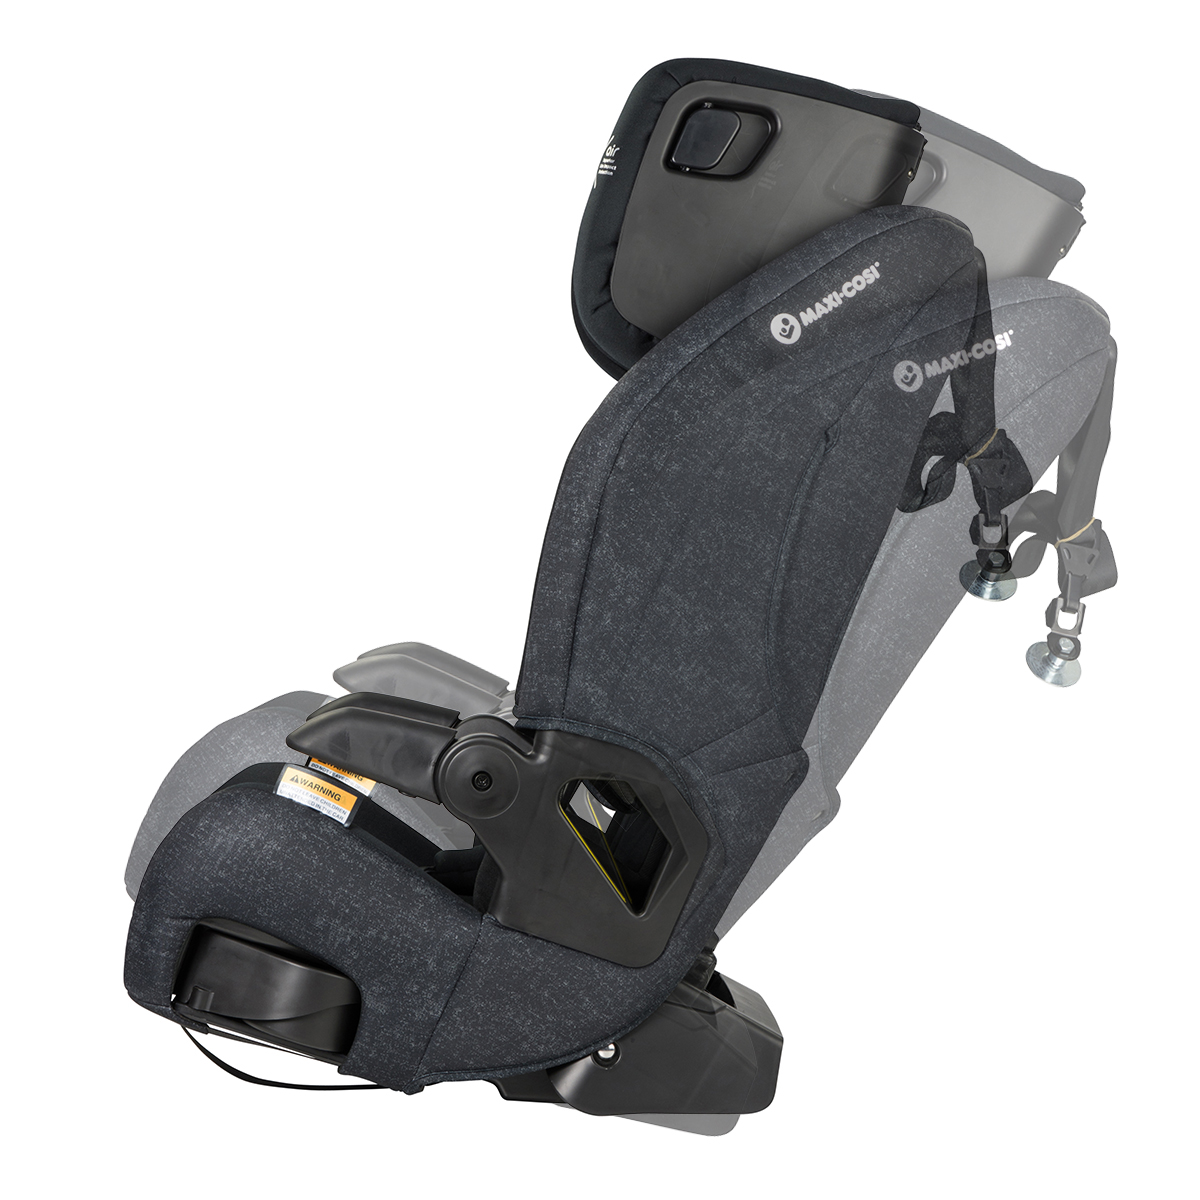 Maxi-Cosi Luna Pro child car seat in various inclined positions